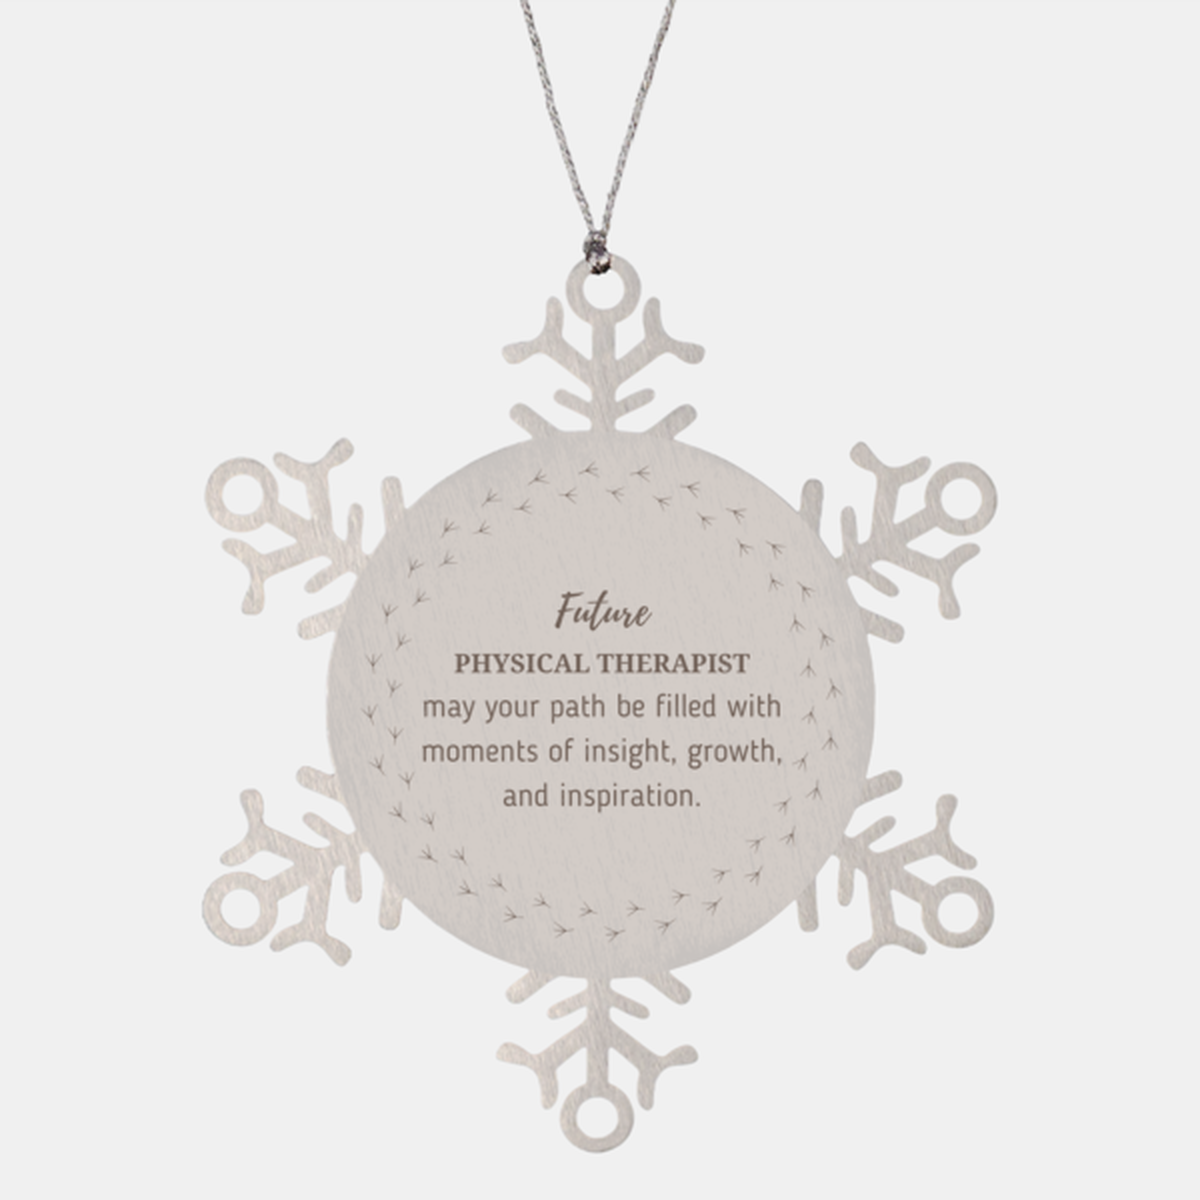 Future Physical Therapist Gifts, May your path be filled with moments of insight, Graduation Gifts for New Physical Therapist, Christmas Unique Snowflake Ornament For Men, Women, Friends